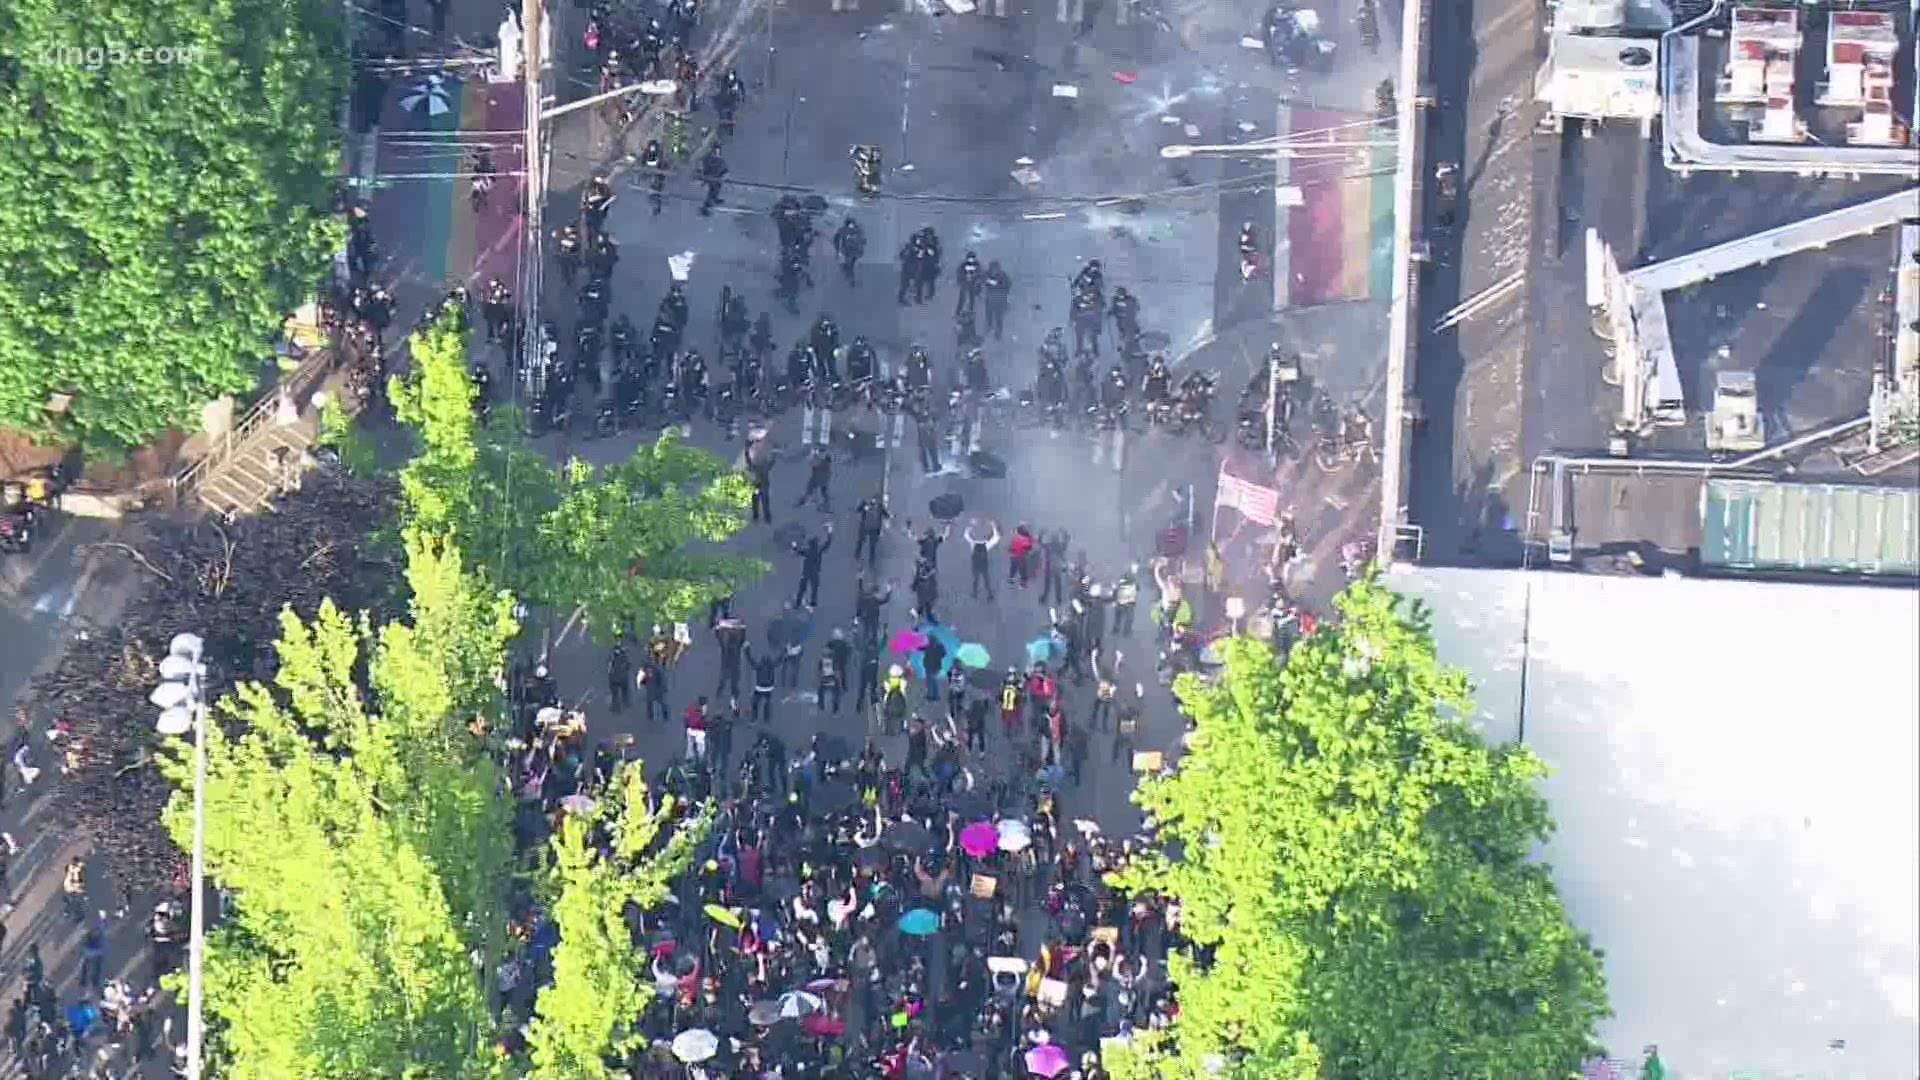 What began as a peaceful protest near Cal Anderson Park has turned tense as Seattle police used crowd control tactics to try and disperse the crowd with flash bangs.